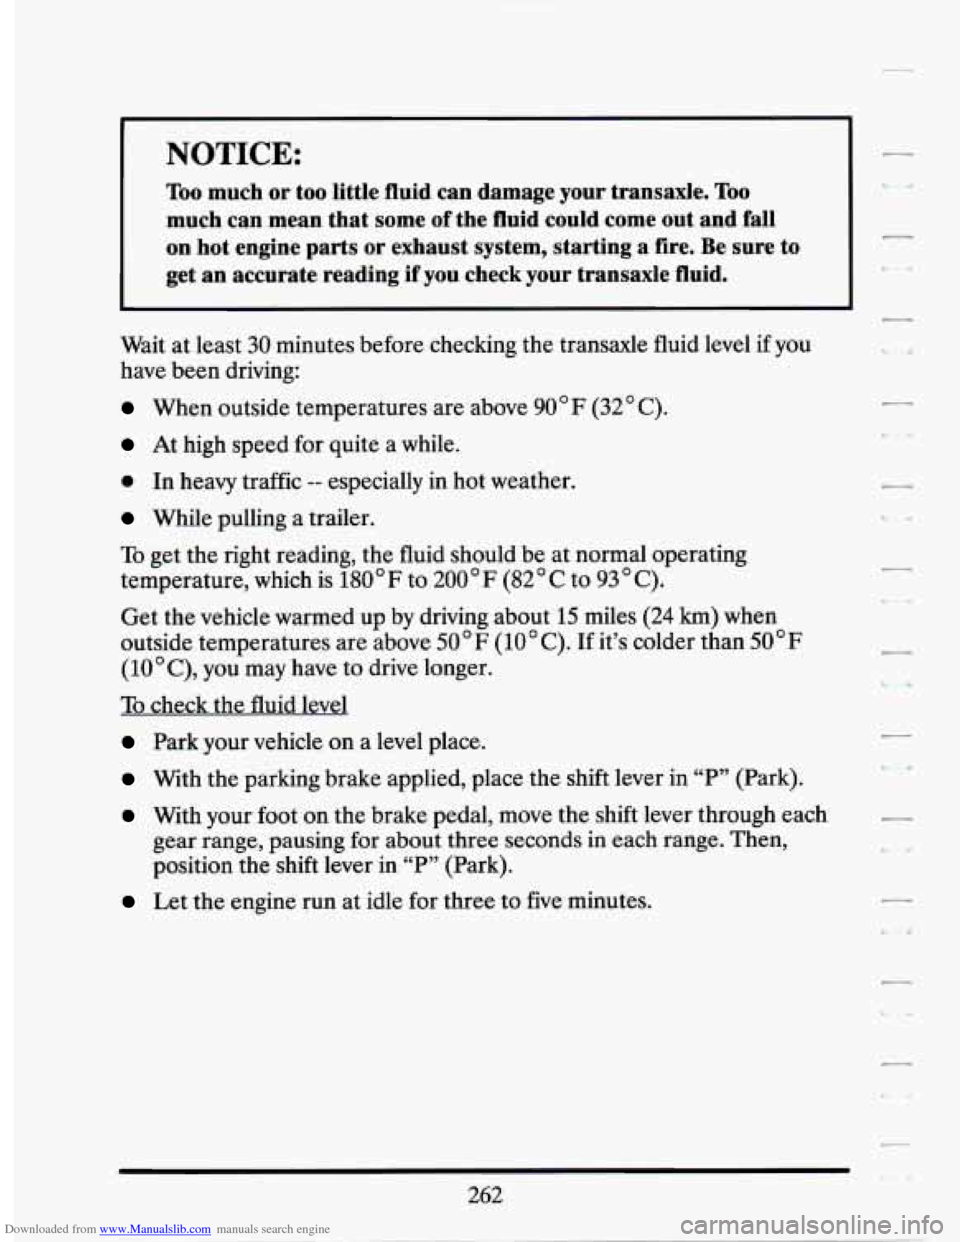 CADILLAC SEVILLE 1994 4.G Owners Manual Downloaded from www.Manualslib.com manuals search engine NOTICE: 
Too much  or  too little  fluid  can  damage  your  transaxle. Too 
much  can  mean  that  some of the  fluid  could  come  out  and  